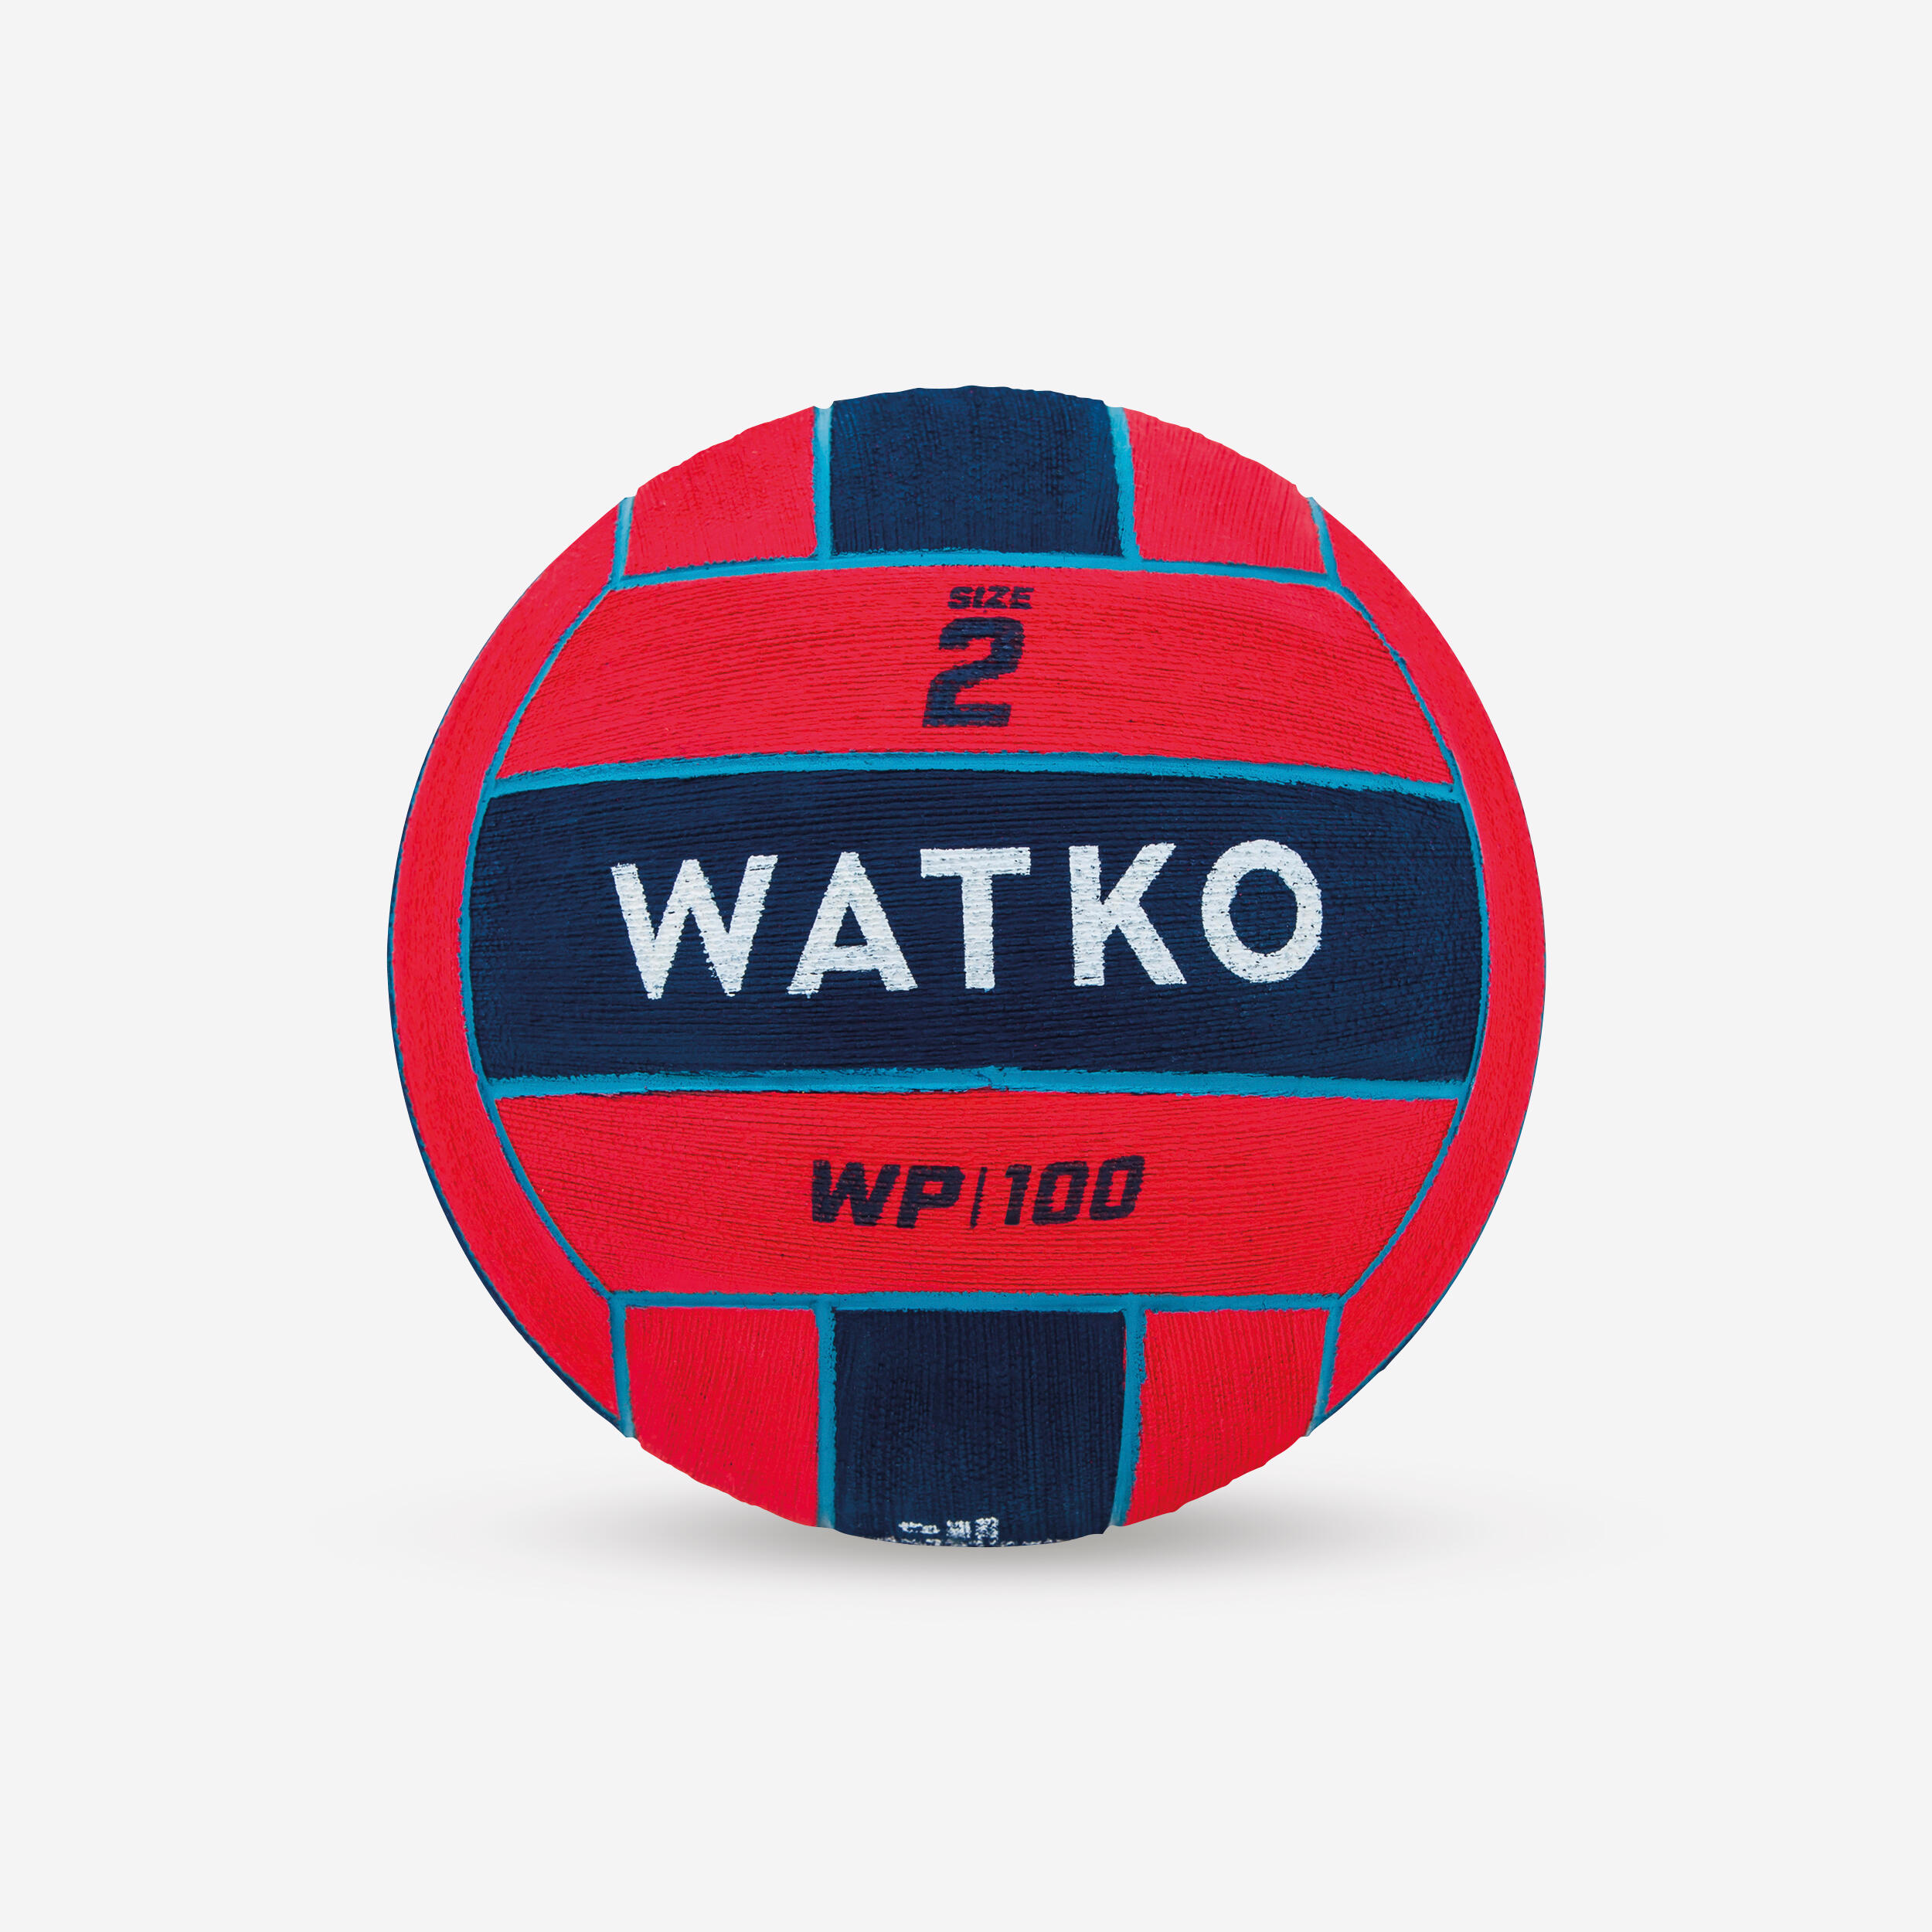 WATER POLO BALL WP100 SIZE 2 - RED / BLUE 1/3